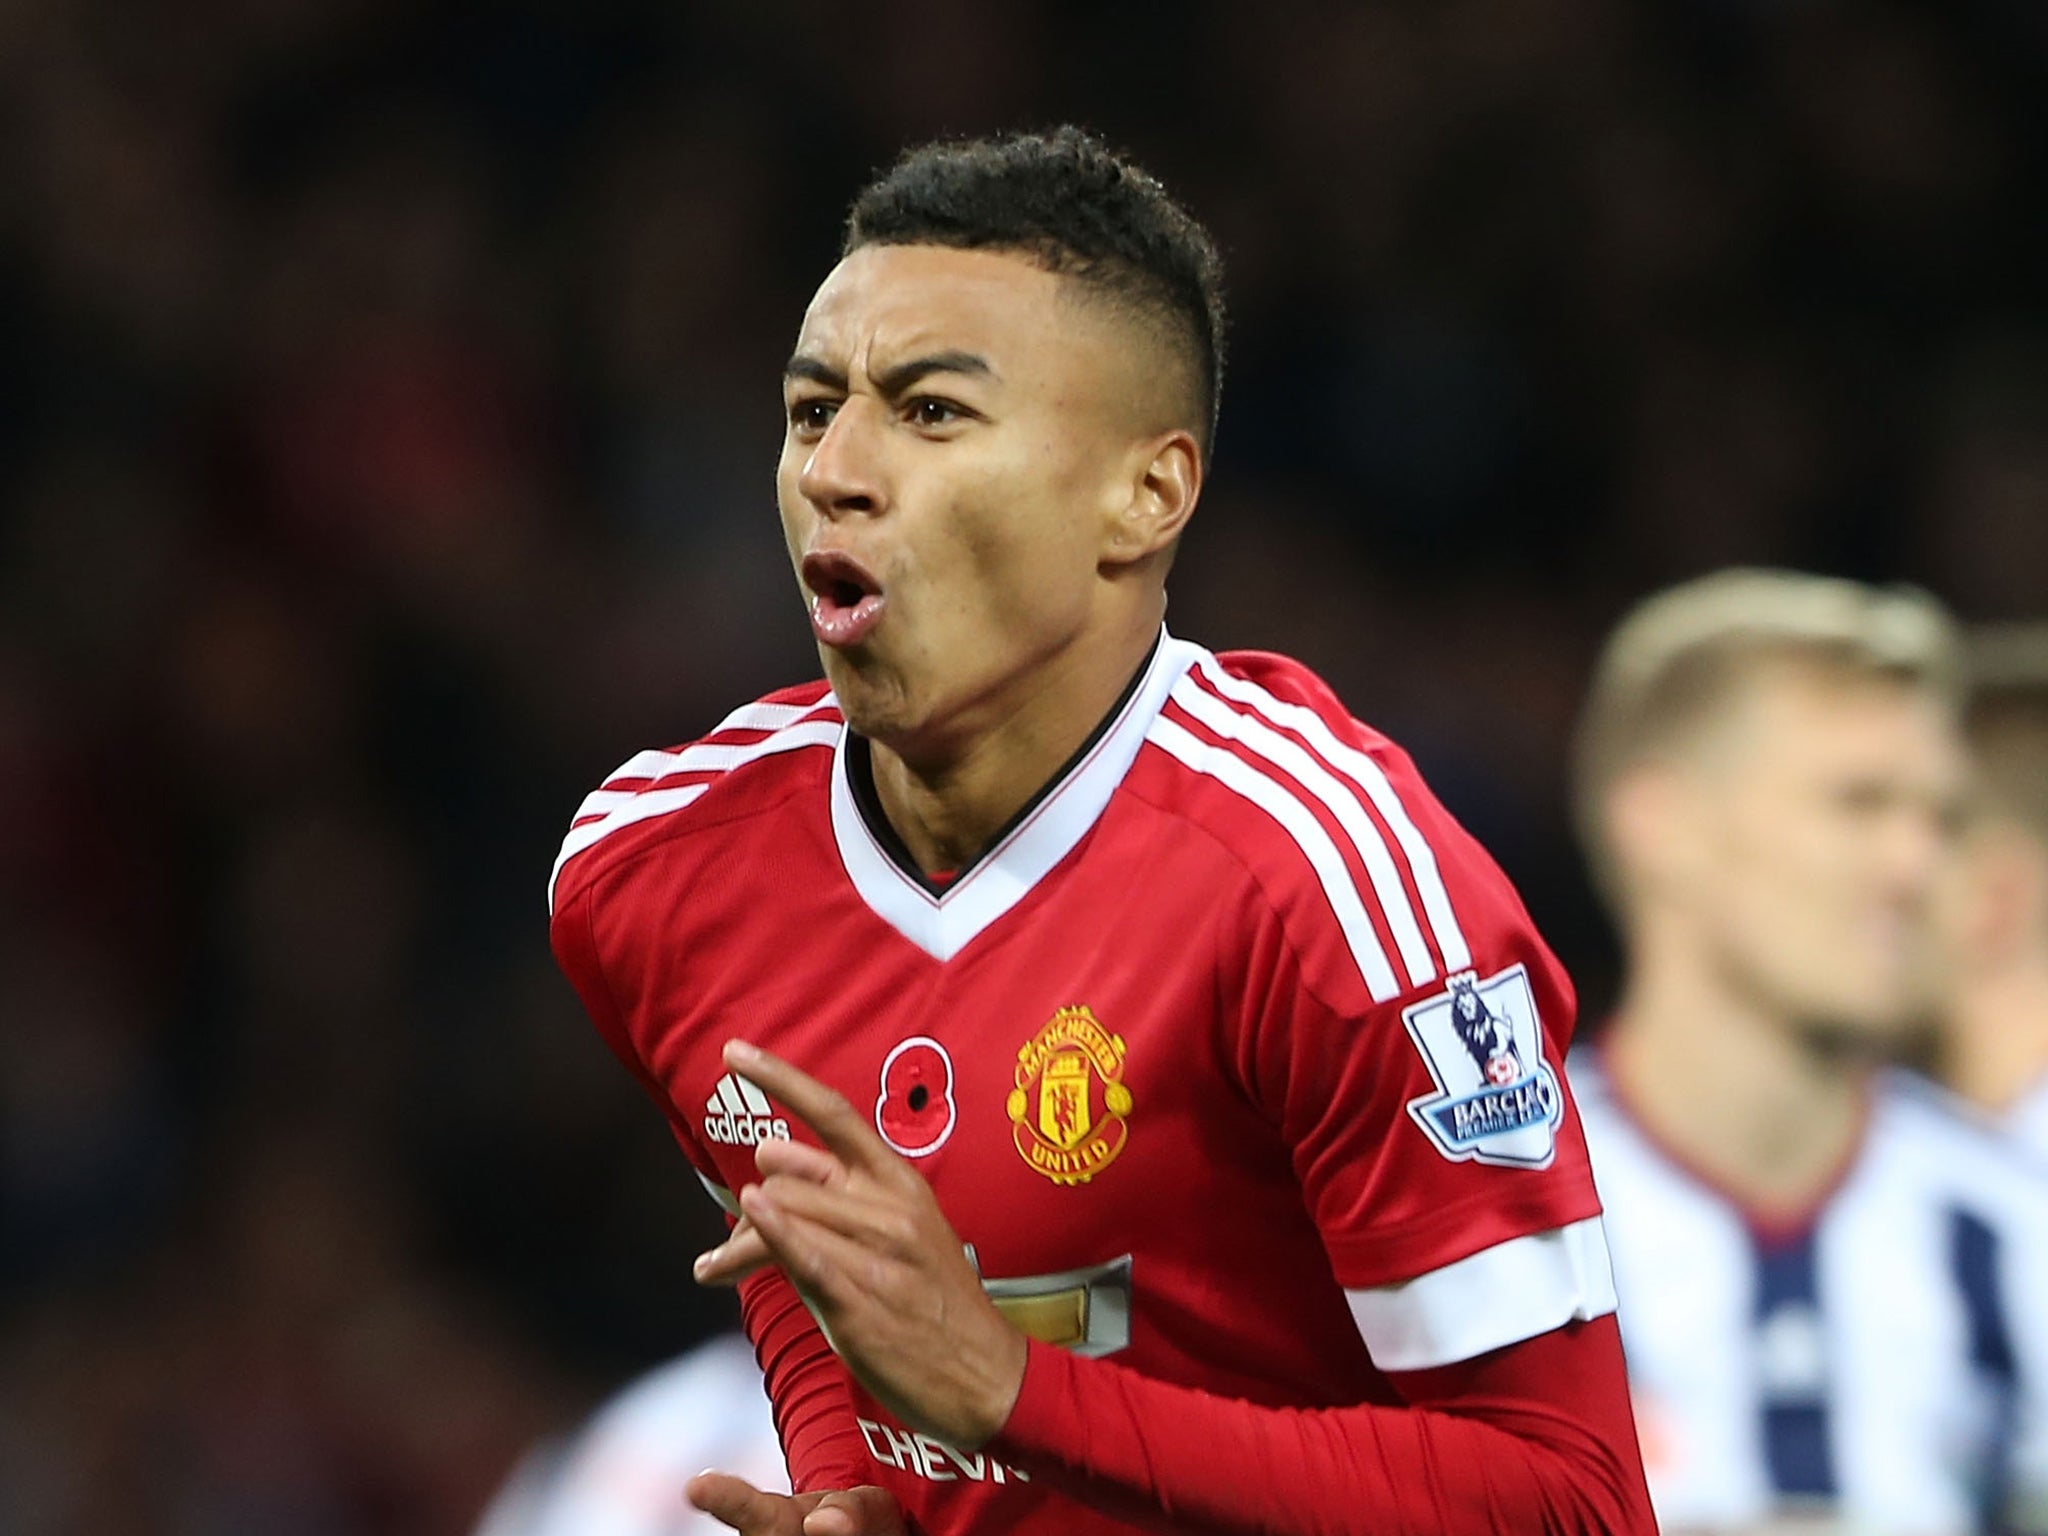 Manchetser United youngster Jesse Lingard